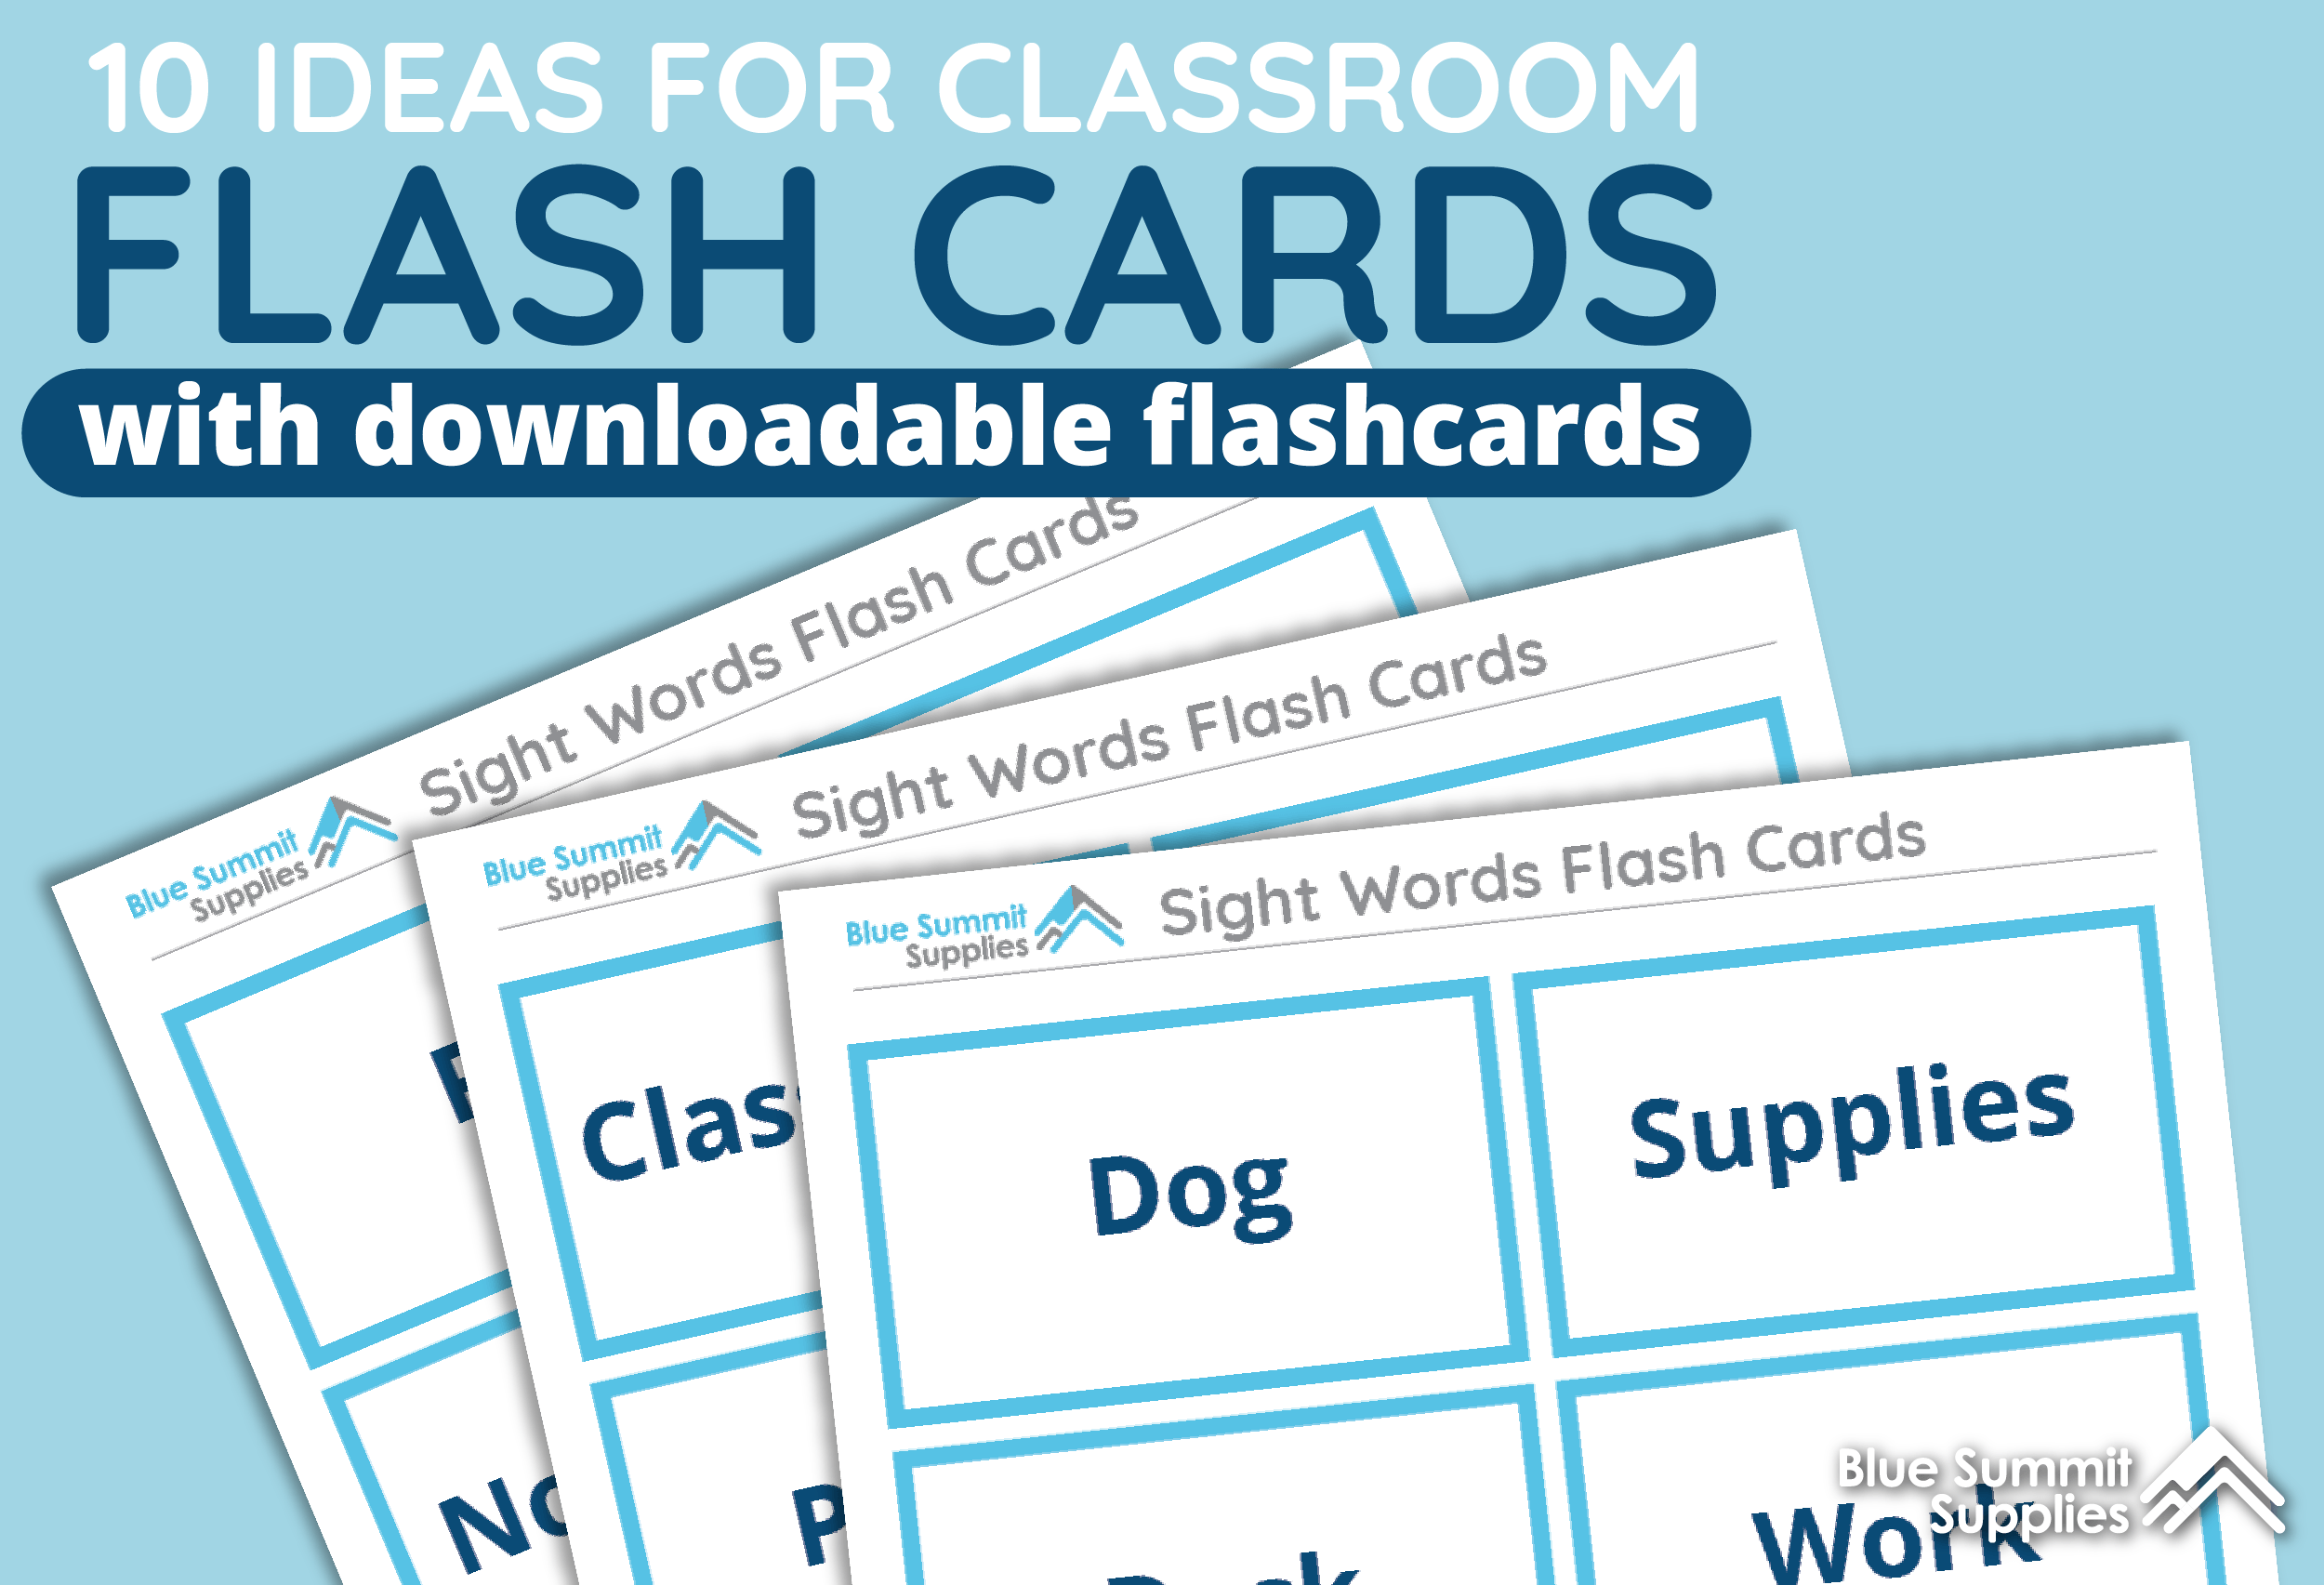 How to make flashcards for kids at home